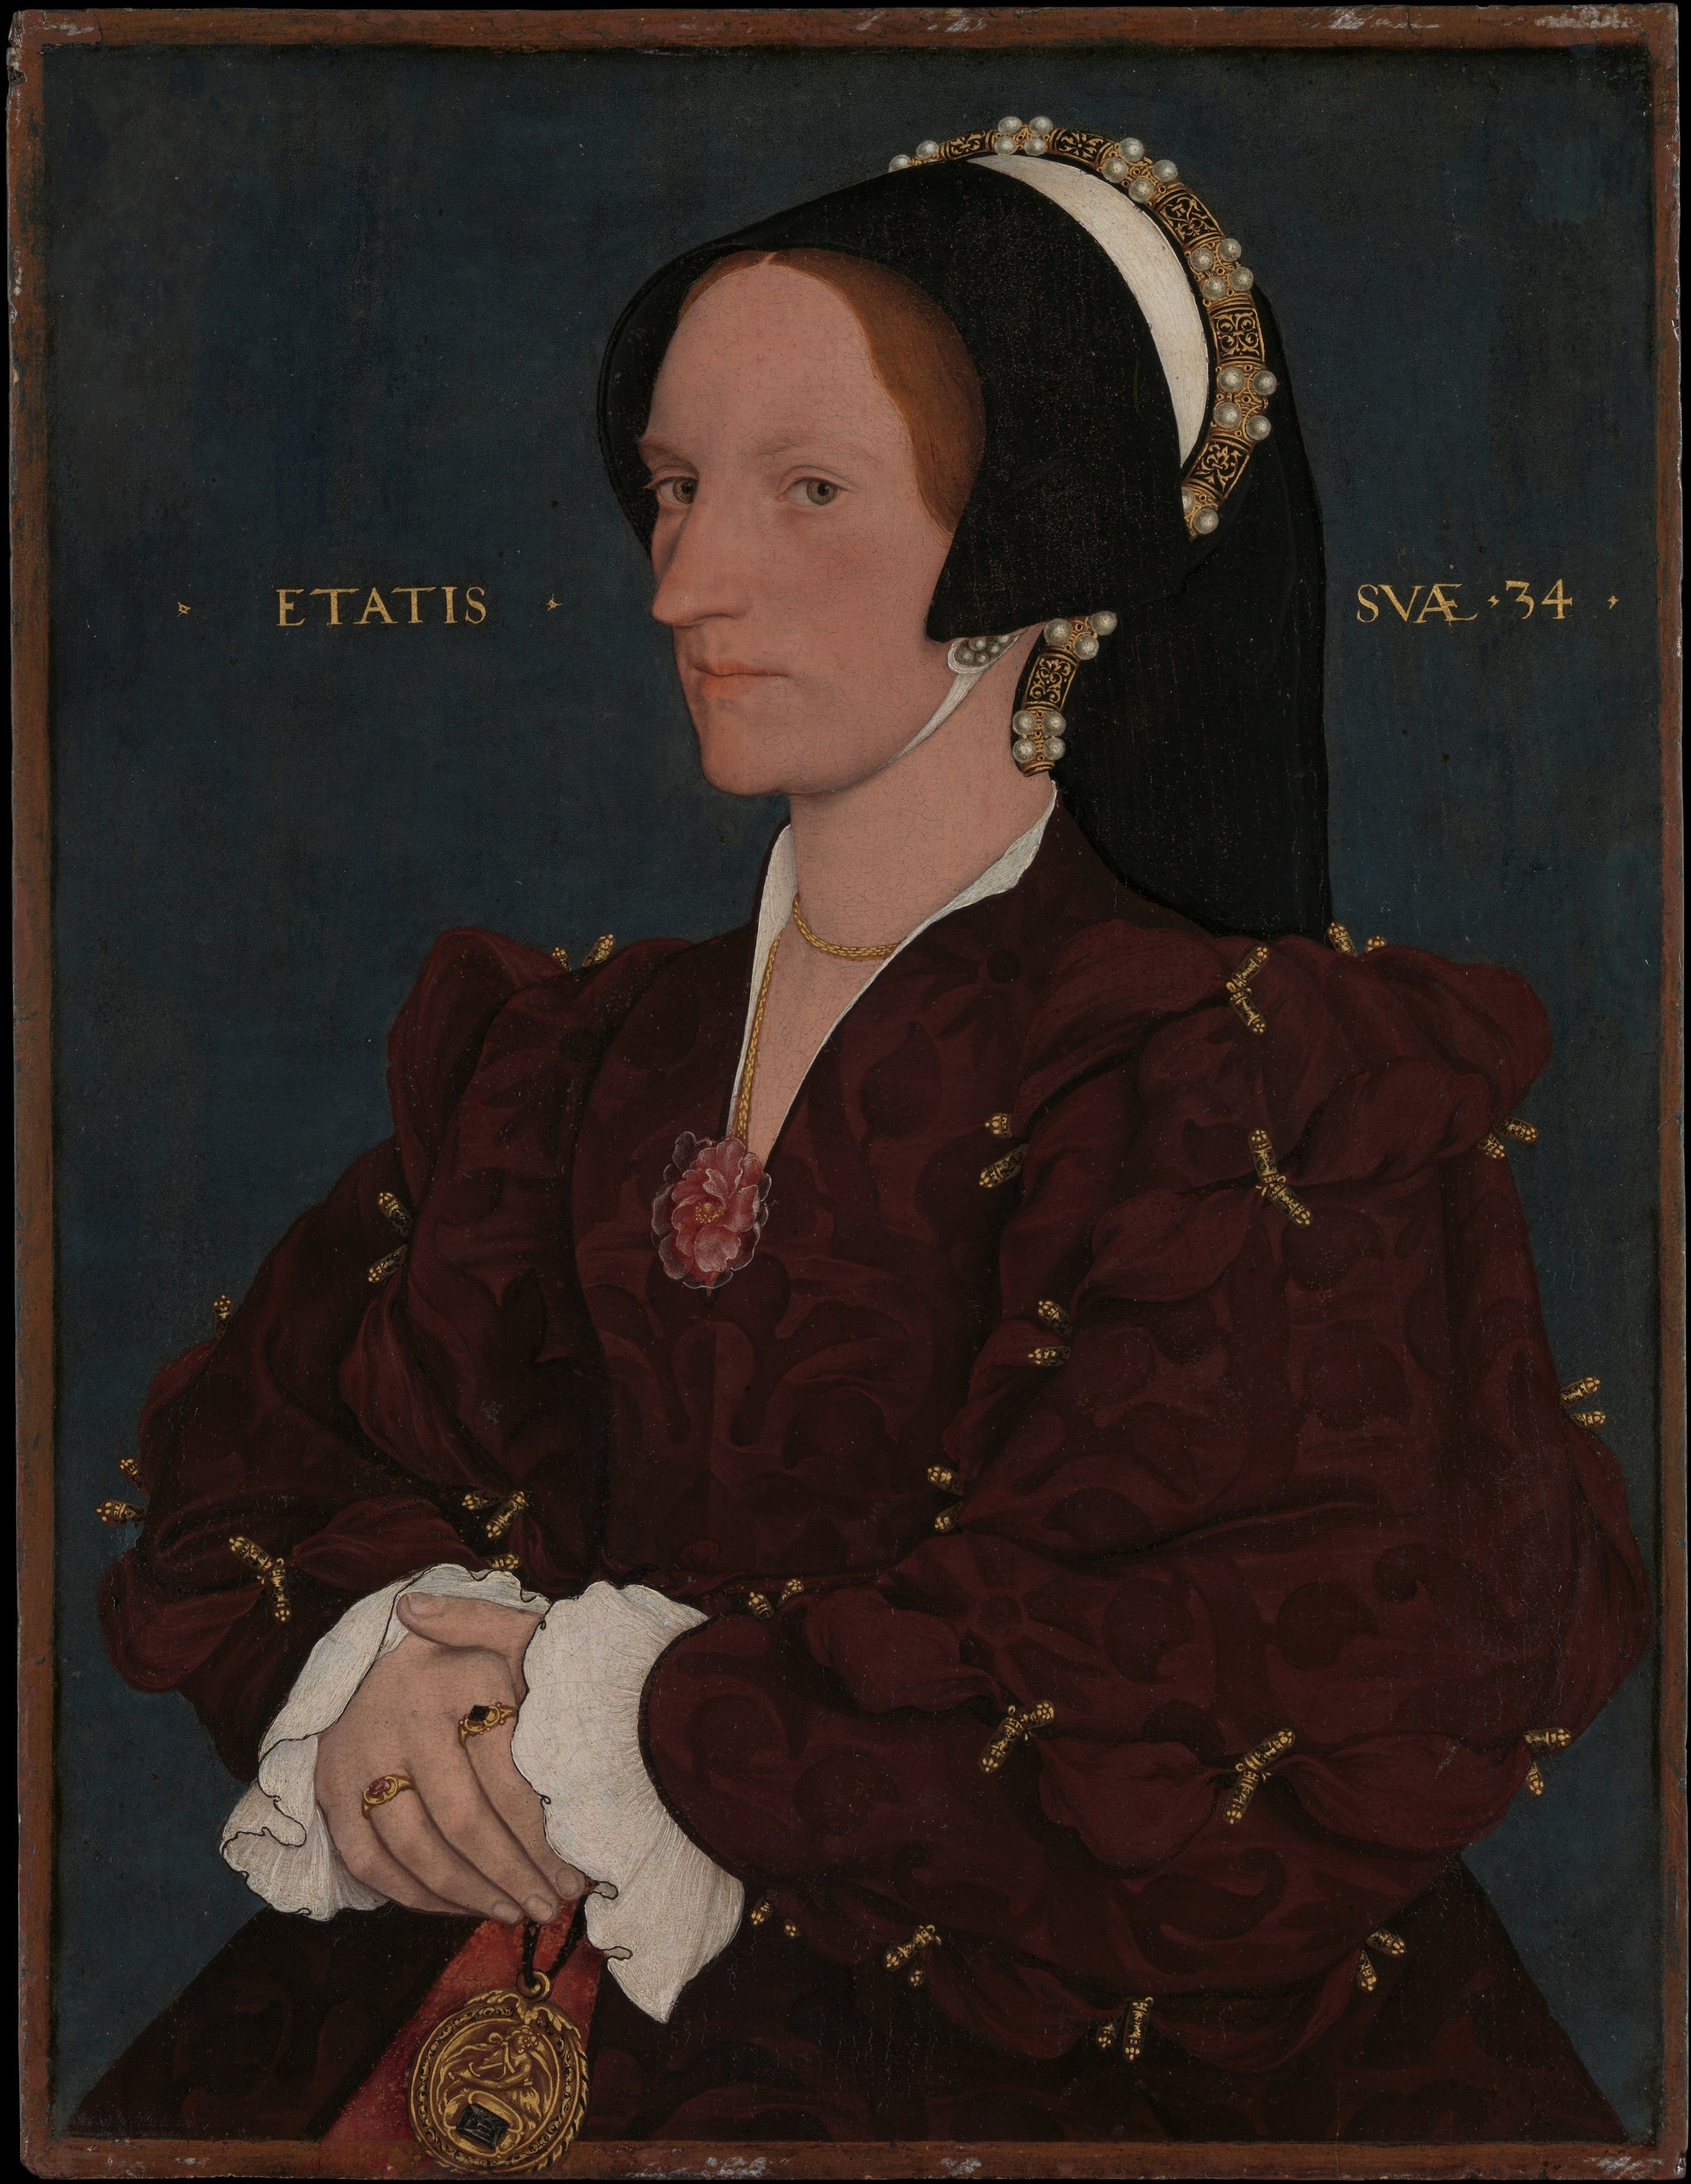 Margaret Wyatt, Lady Lee by Hans Holbein the Younger - 1540 - 42.5 x 32.7 cm Metropolitan Museum of Art